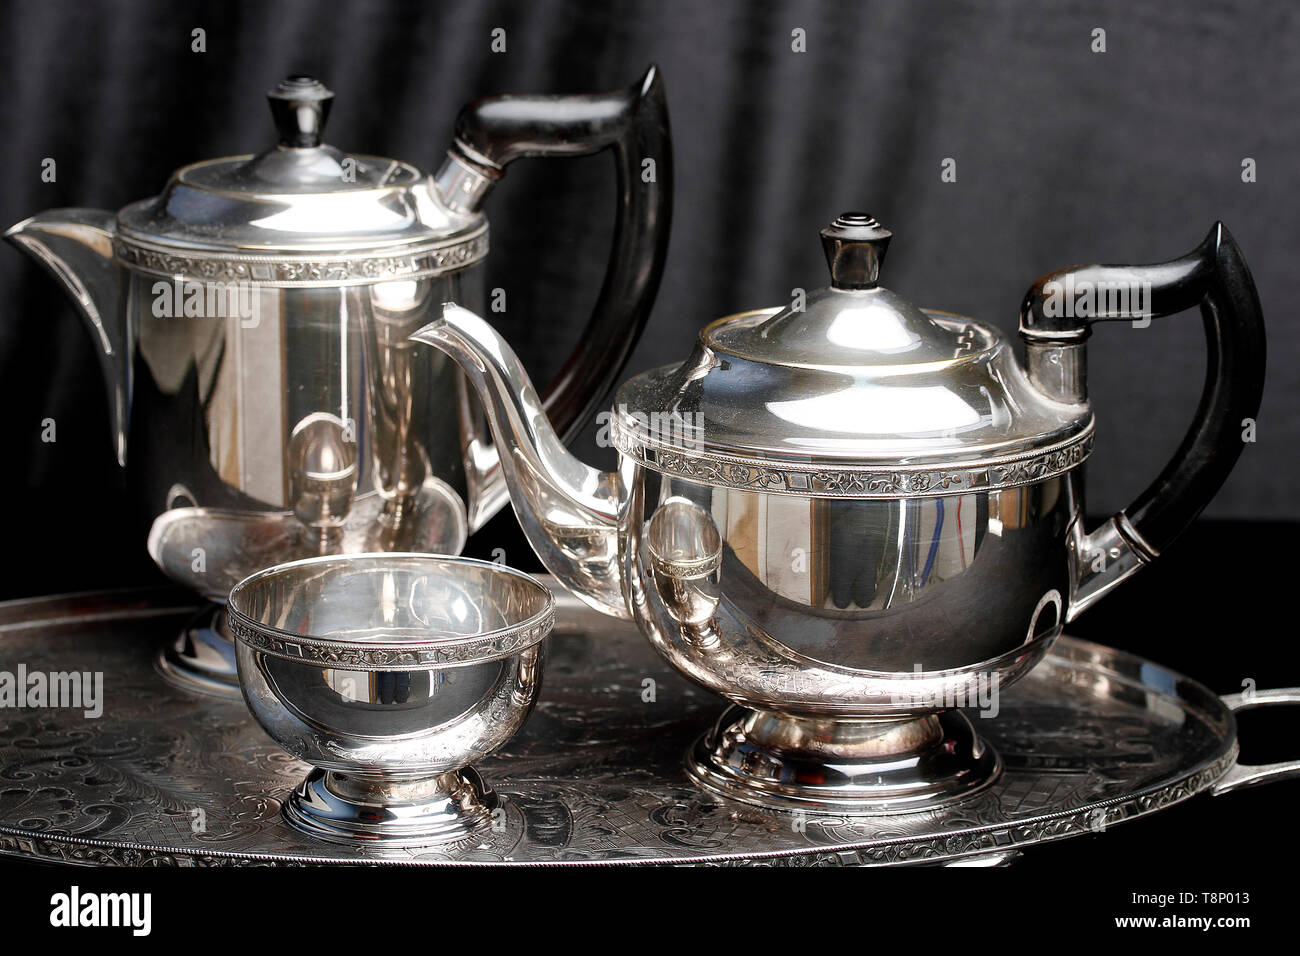 Viners of Sheffield Alpha Plate, silverplated teaset. Teapot, water pot, sugar bowl and oval tray. 1950's vintage Name: Viners of Sheffield Alpha Plat Stock Photo